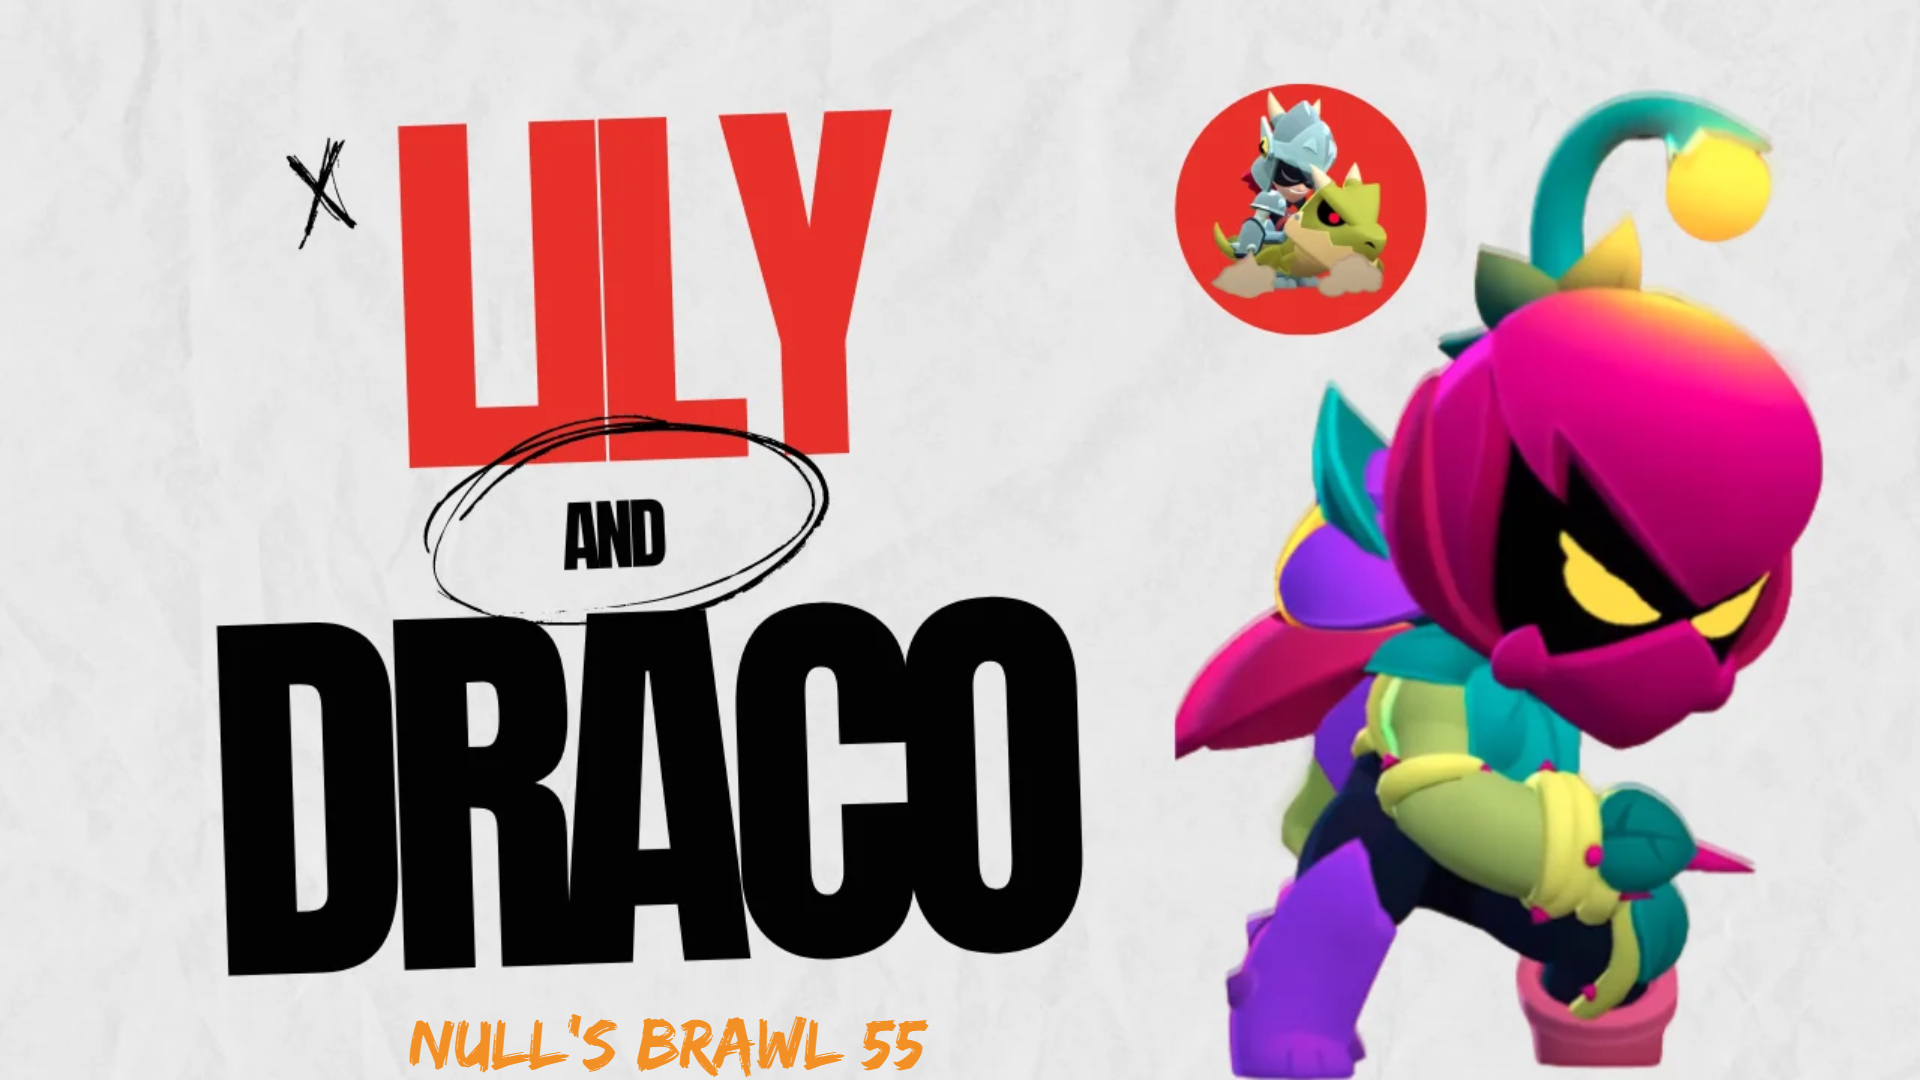 Null's Brawl 55.228: The Latest Update Shakes Up the Mobile Gaming Landscape